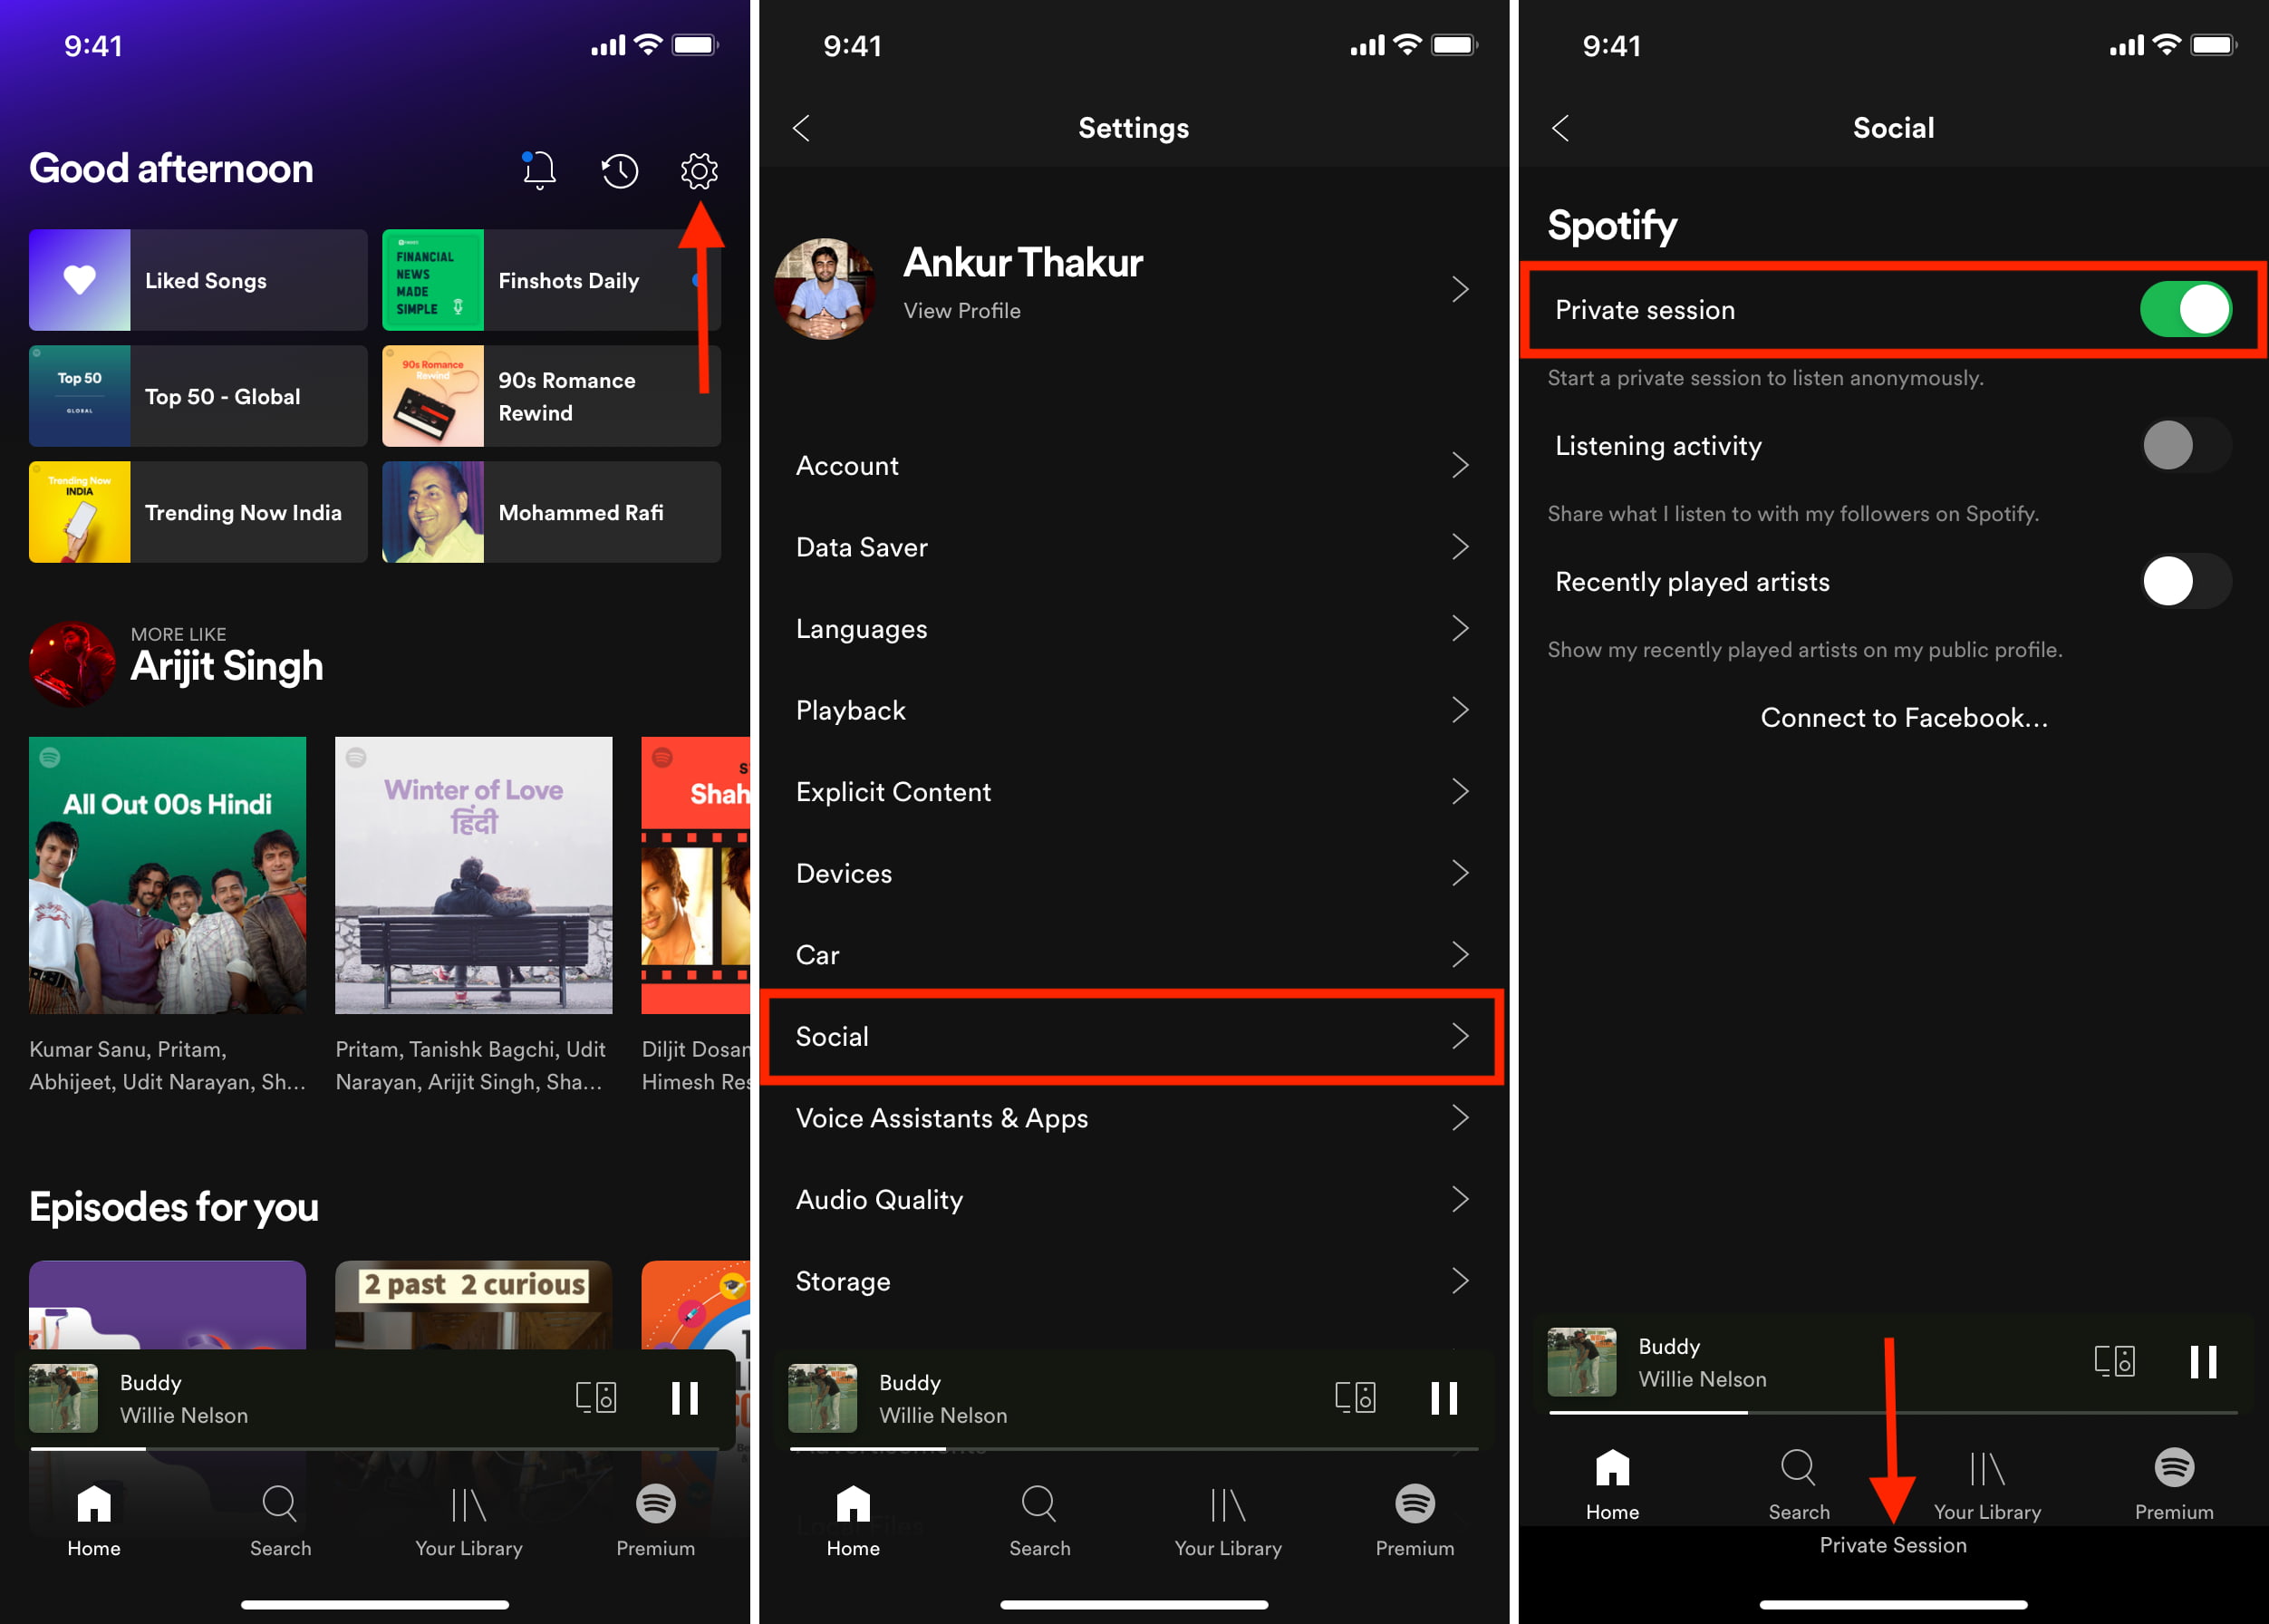 Steps to enable Private Session in Spotify on mobile